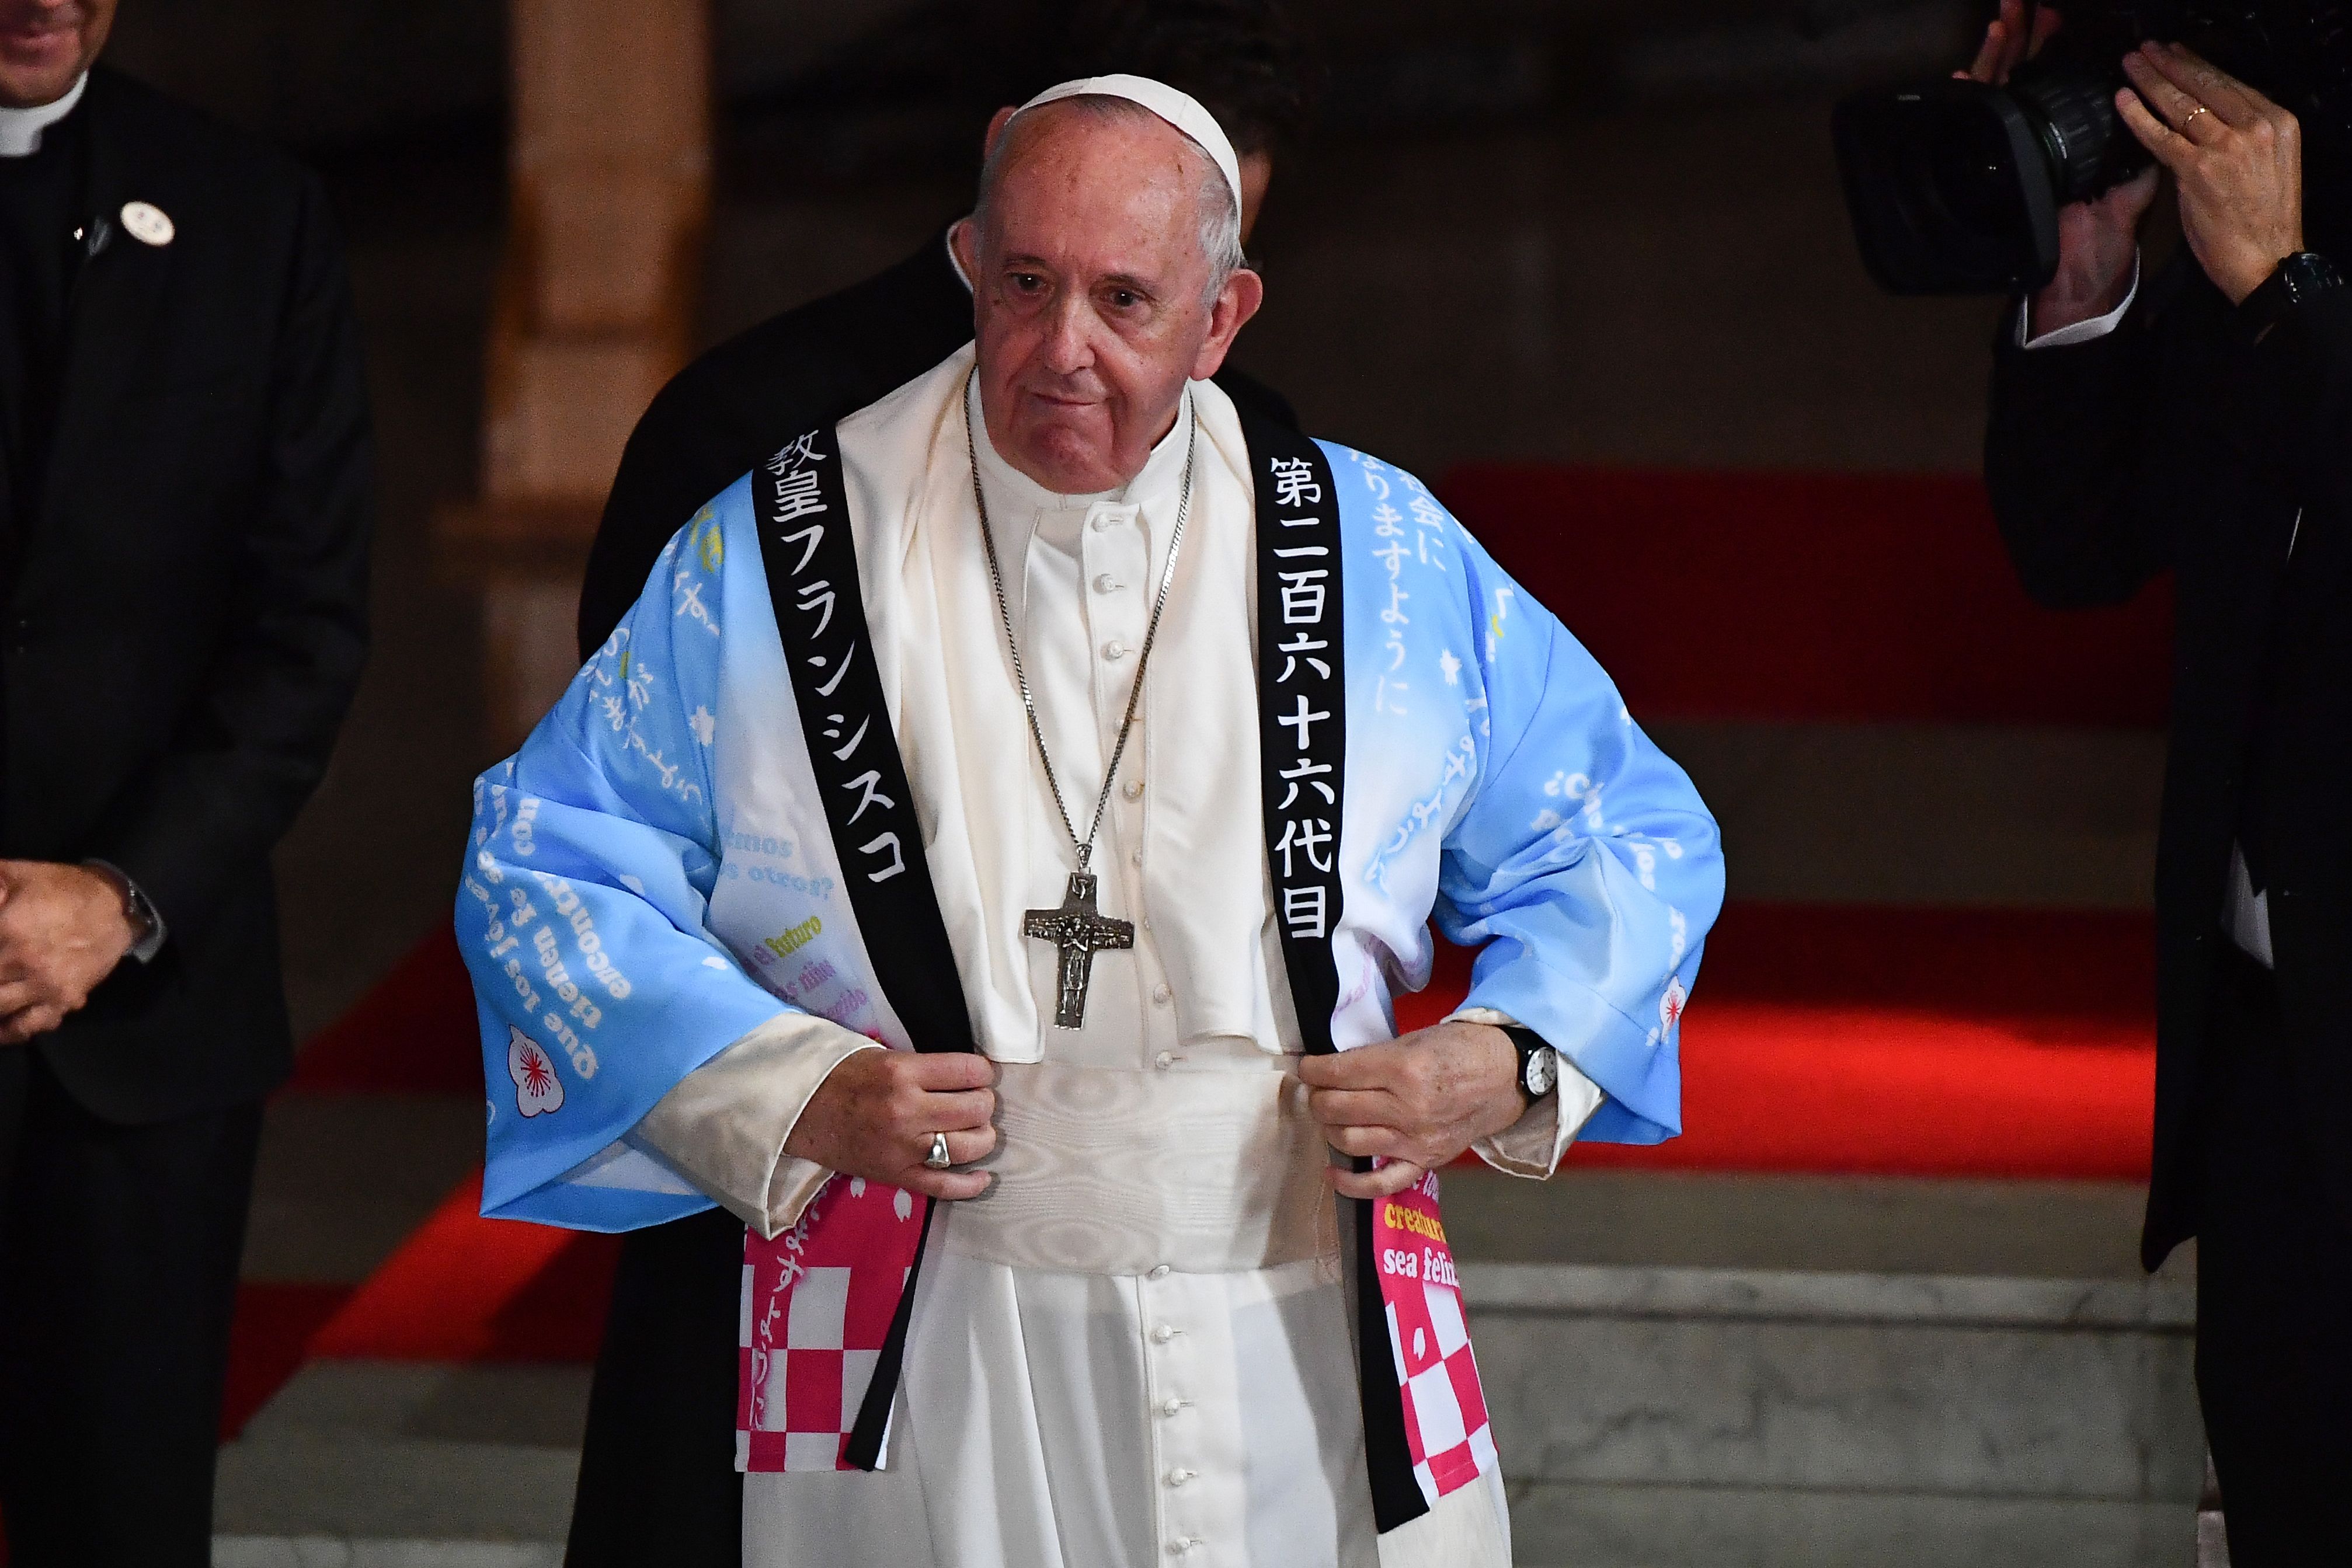 Pope Wears Anime This is the identity used by gemini saga after he took